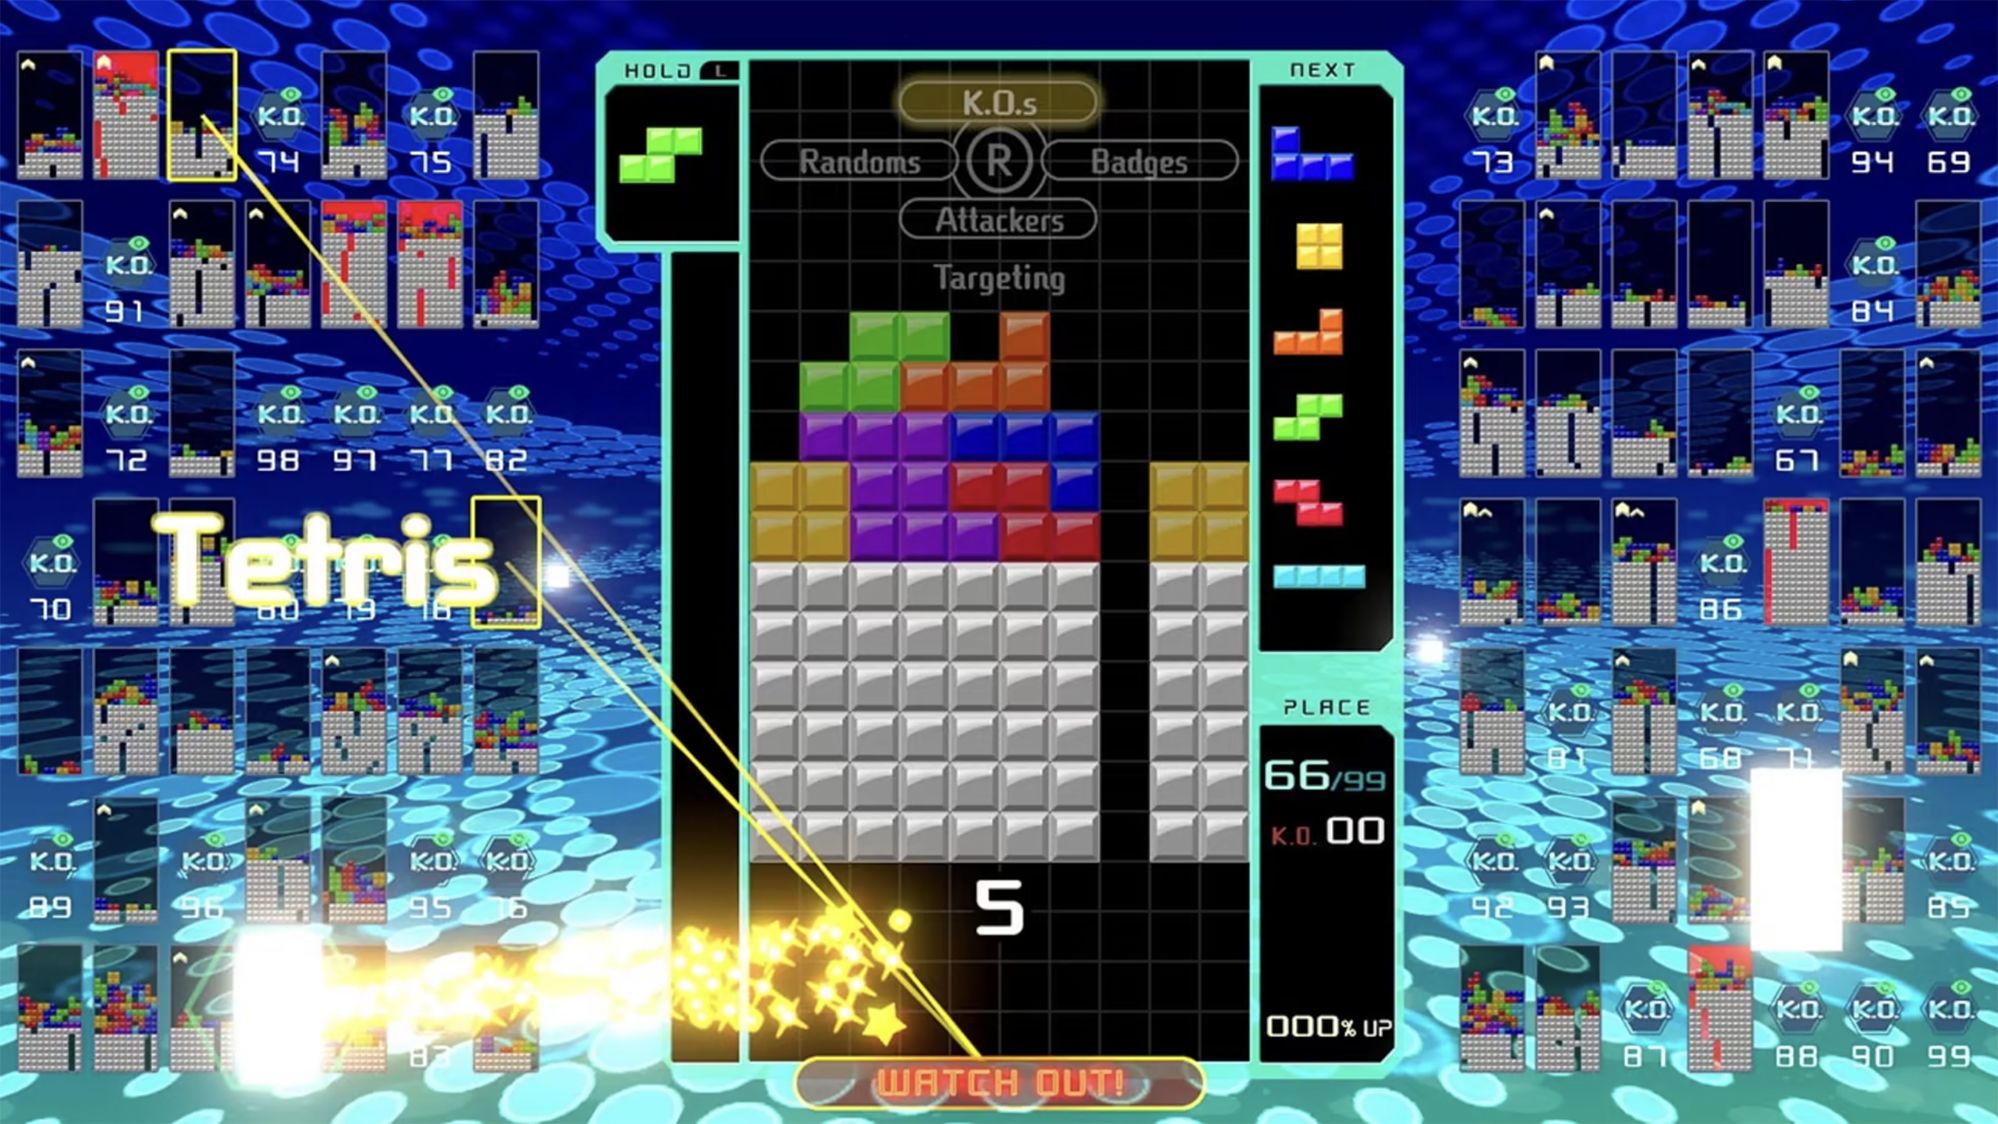 Let's Play Tetris Ultimate - Multiplayer Mondays 